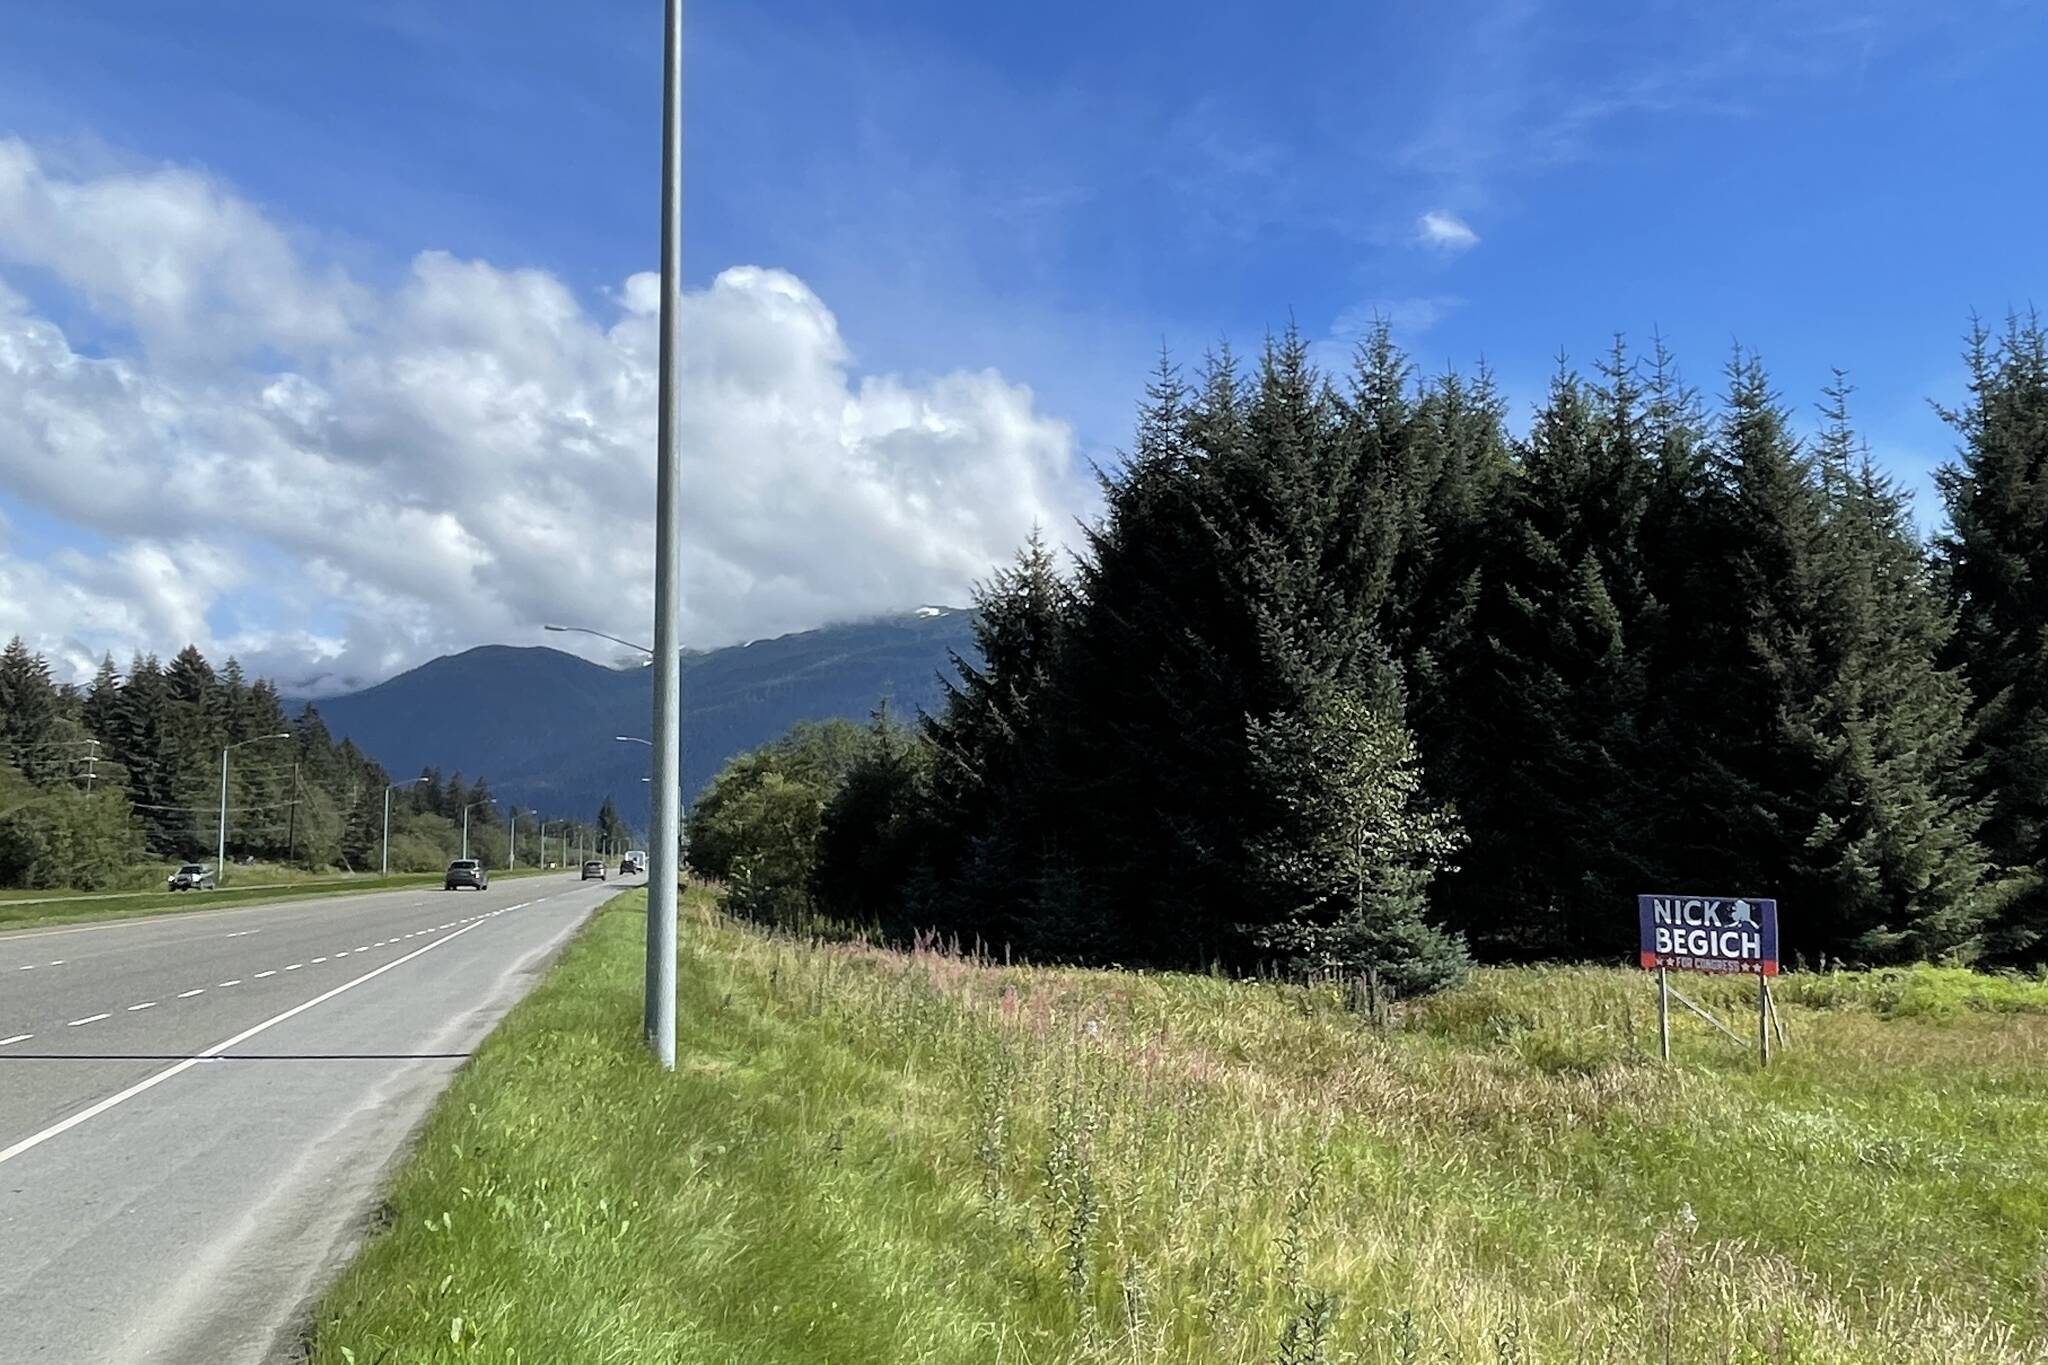 A political sign that was later removed sits in a field near the Mendenhall Wetlands. Rules around standalone political signs are tightly regulated in Alaska. (Michael S. Lockett / Juneau Empire)